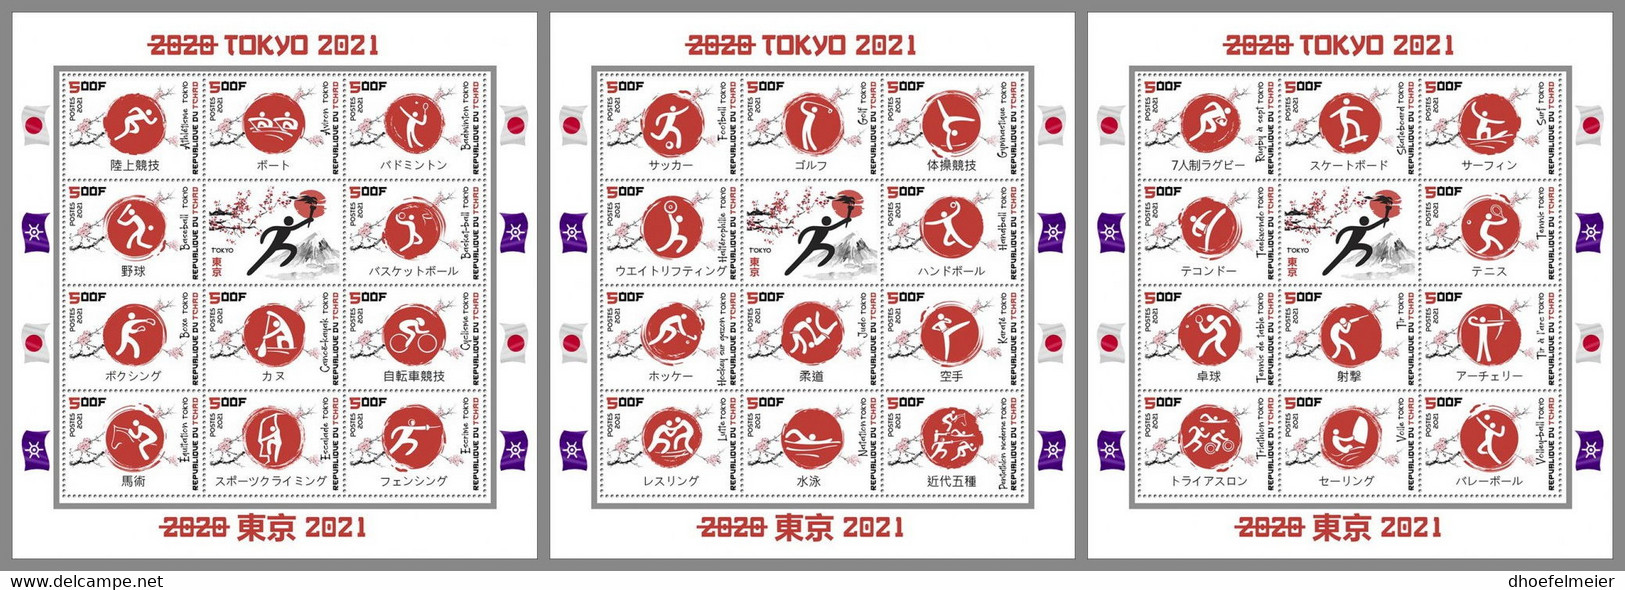 CHAD 2021 MNH Tokyo Summer Games 2021 Olympische Sommerspiele 3M/S - OFFICIAL ISSUE - DHQ2214 - Sommer 2020: Tokio